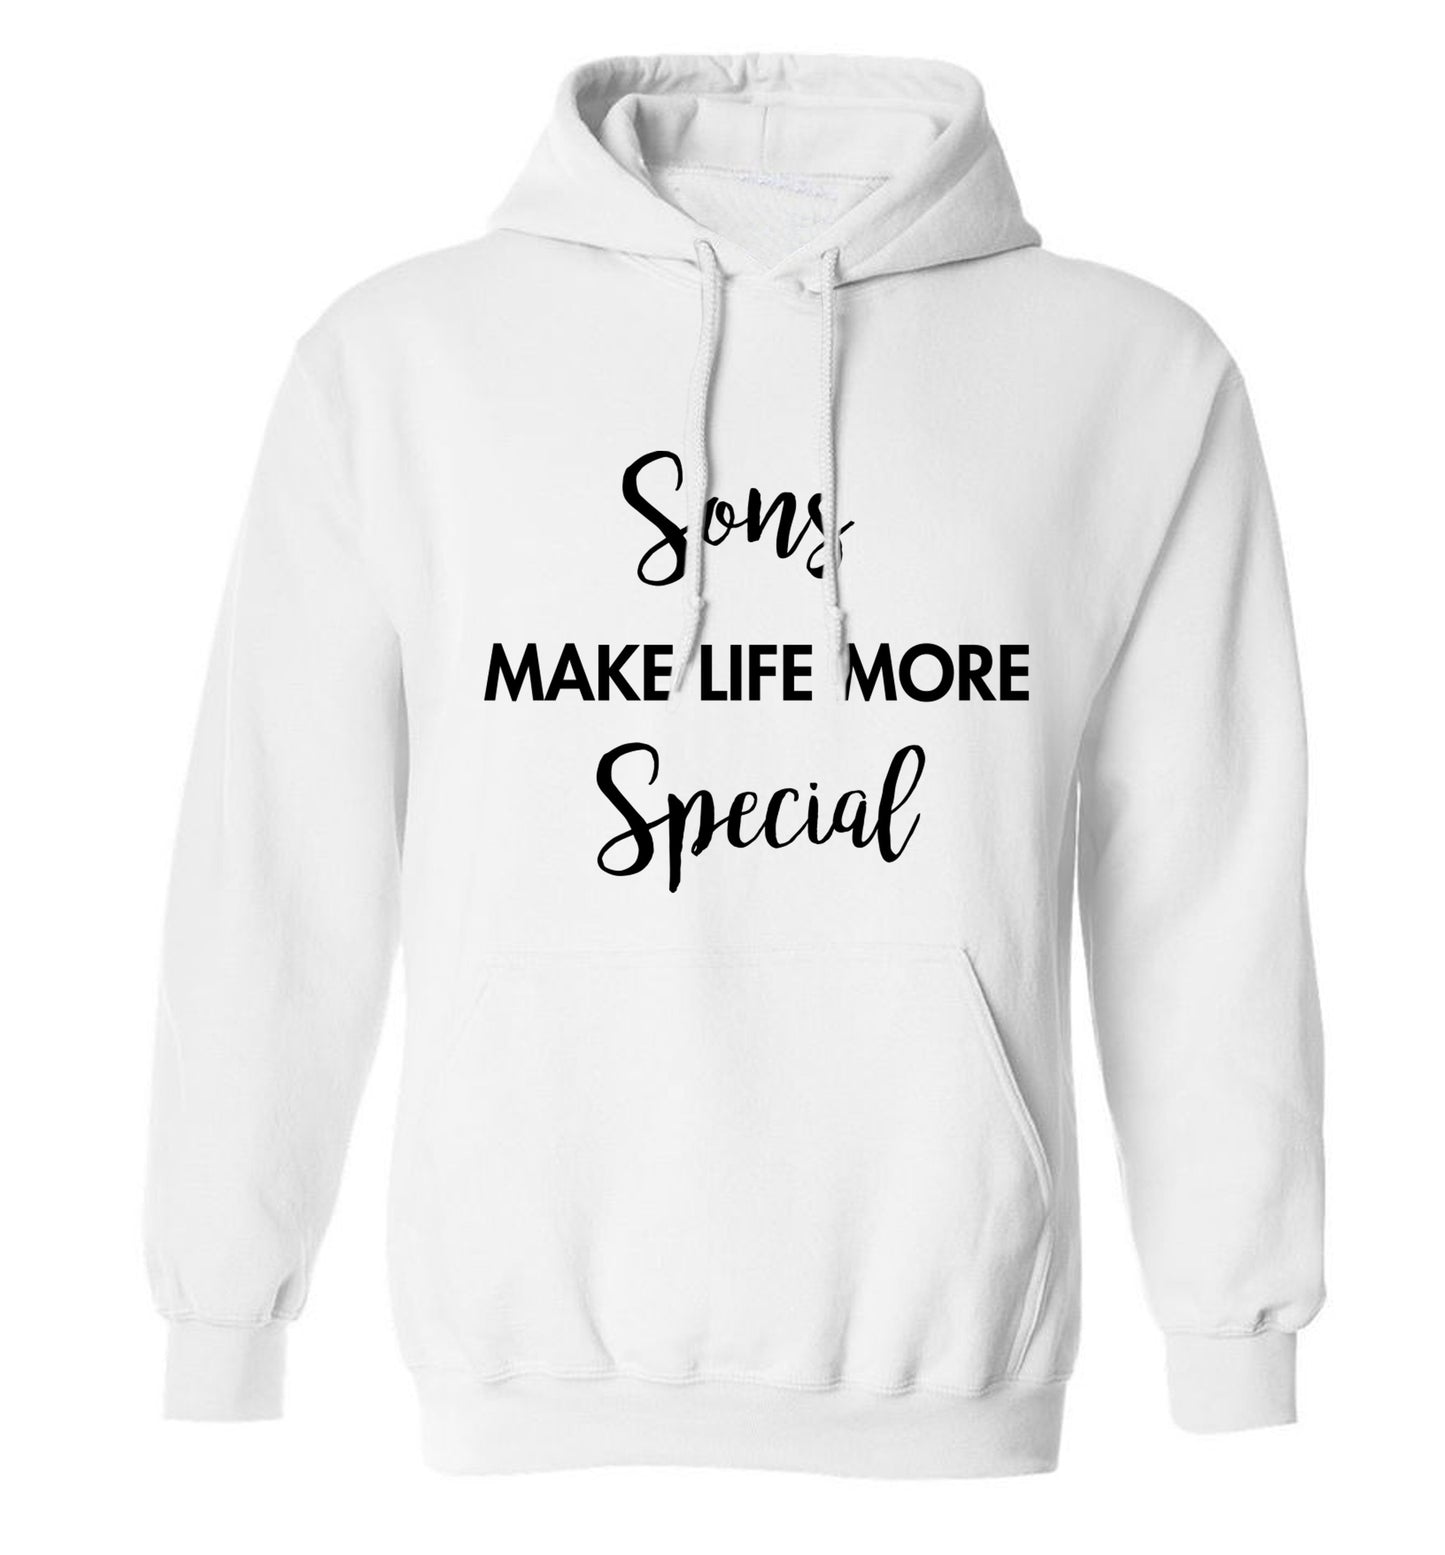 Sons make life more special adults unisex white hoodie 2XL